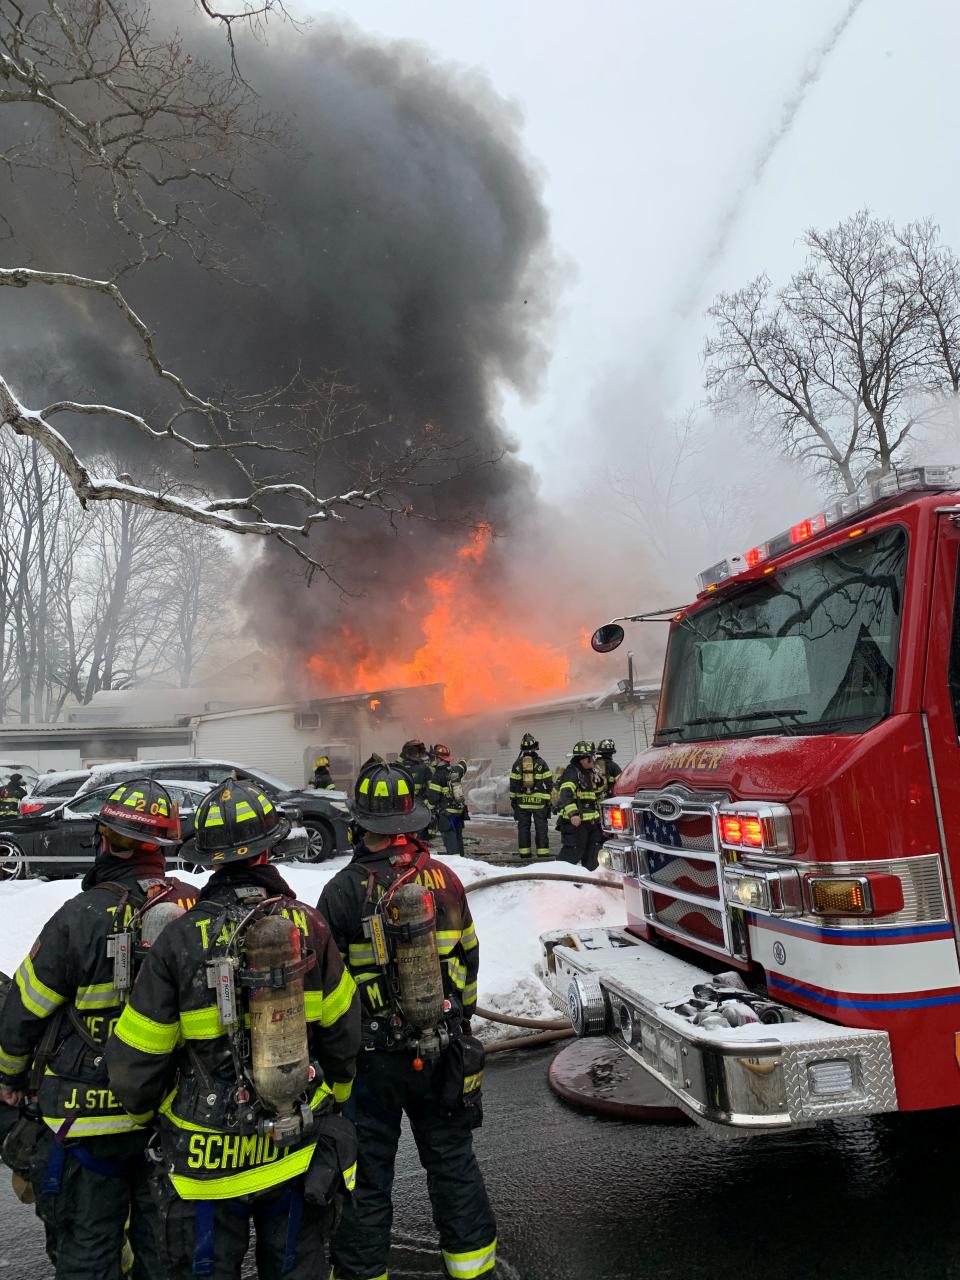 Members of the Tallman Fire Department on the scene of the Motty's Supermarket fire in Monsey on Feb. 18, 2021. The market's owner had run afoul of Town of Ramapo building inspectors for years, racking up violation after violation at a site where shipping containers were added to the back of the building. When conditions worsened, firefighters were pulled out of the building.